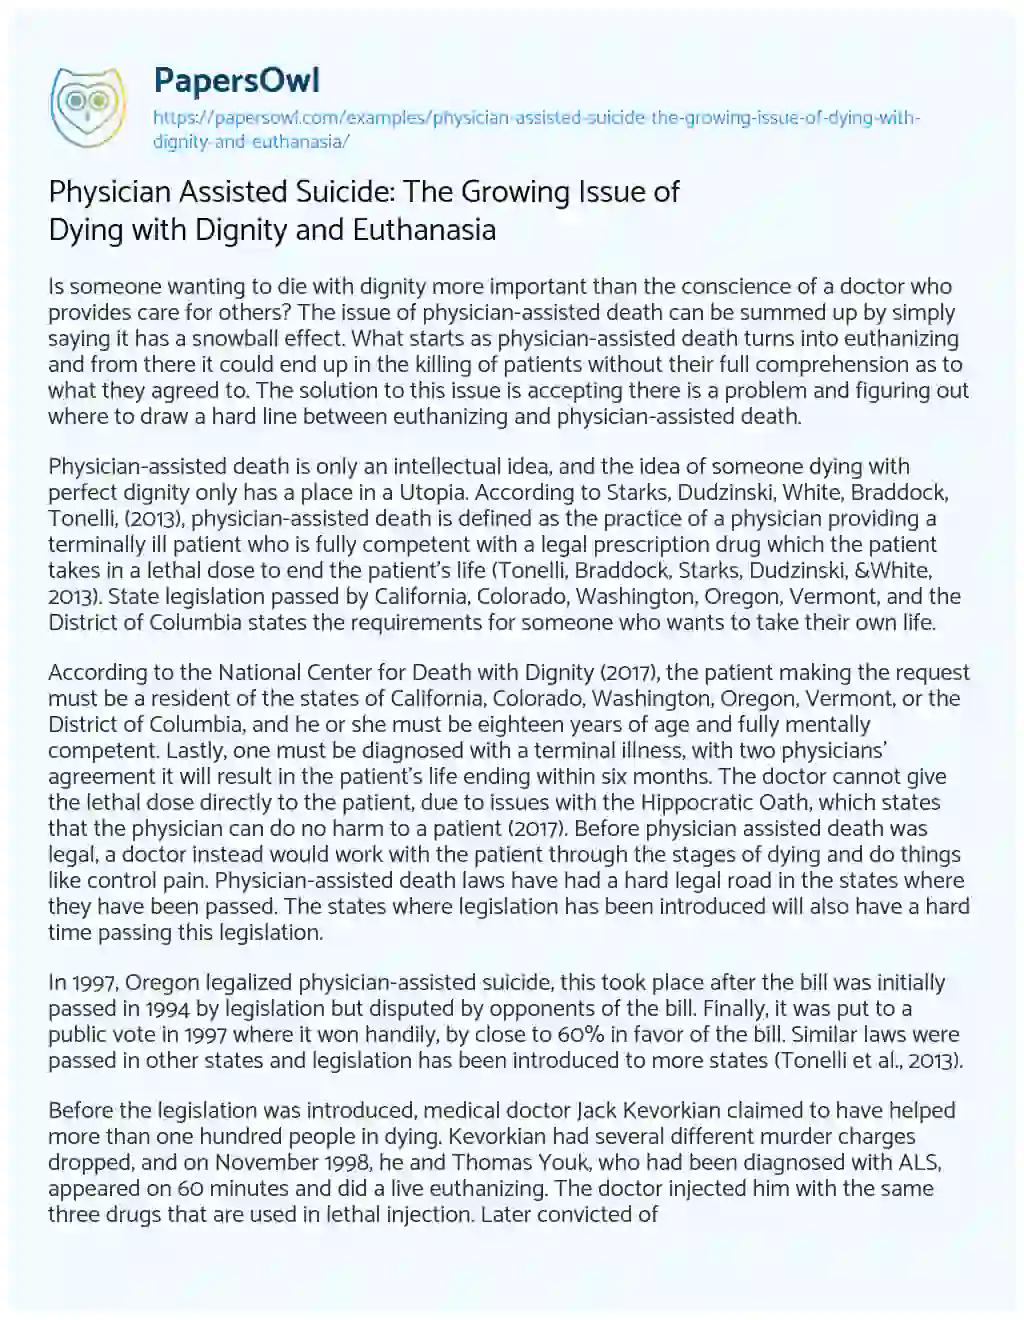 Essay on Physician Assisted Suicide: the Growing Issue of Dying with Dignity and Euthanasia